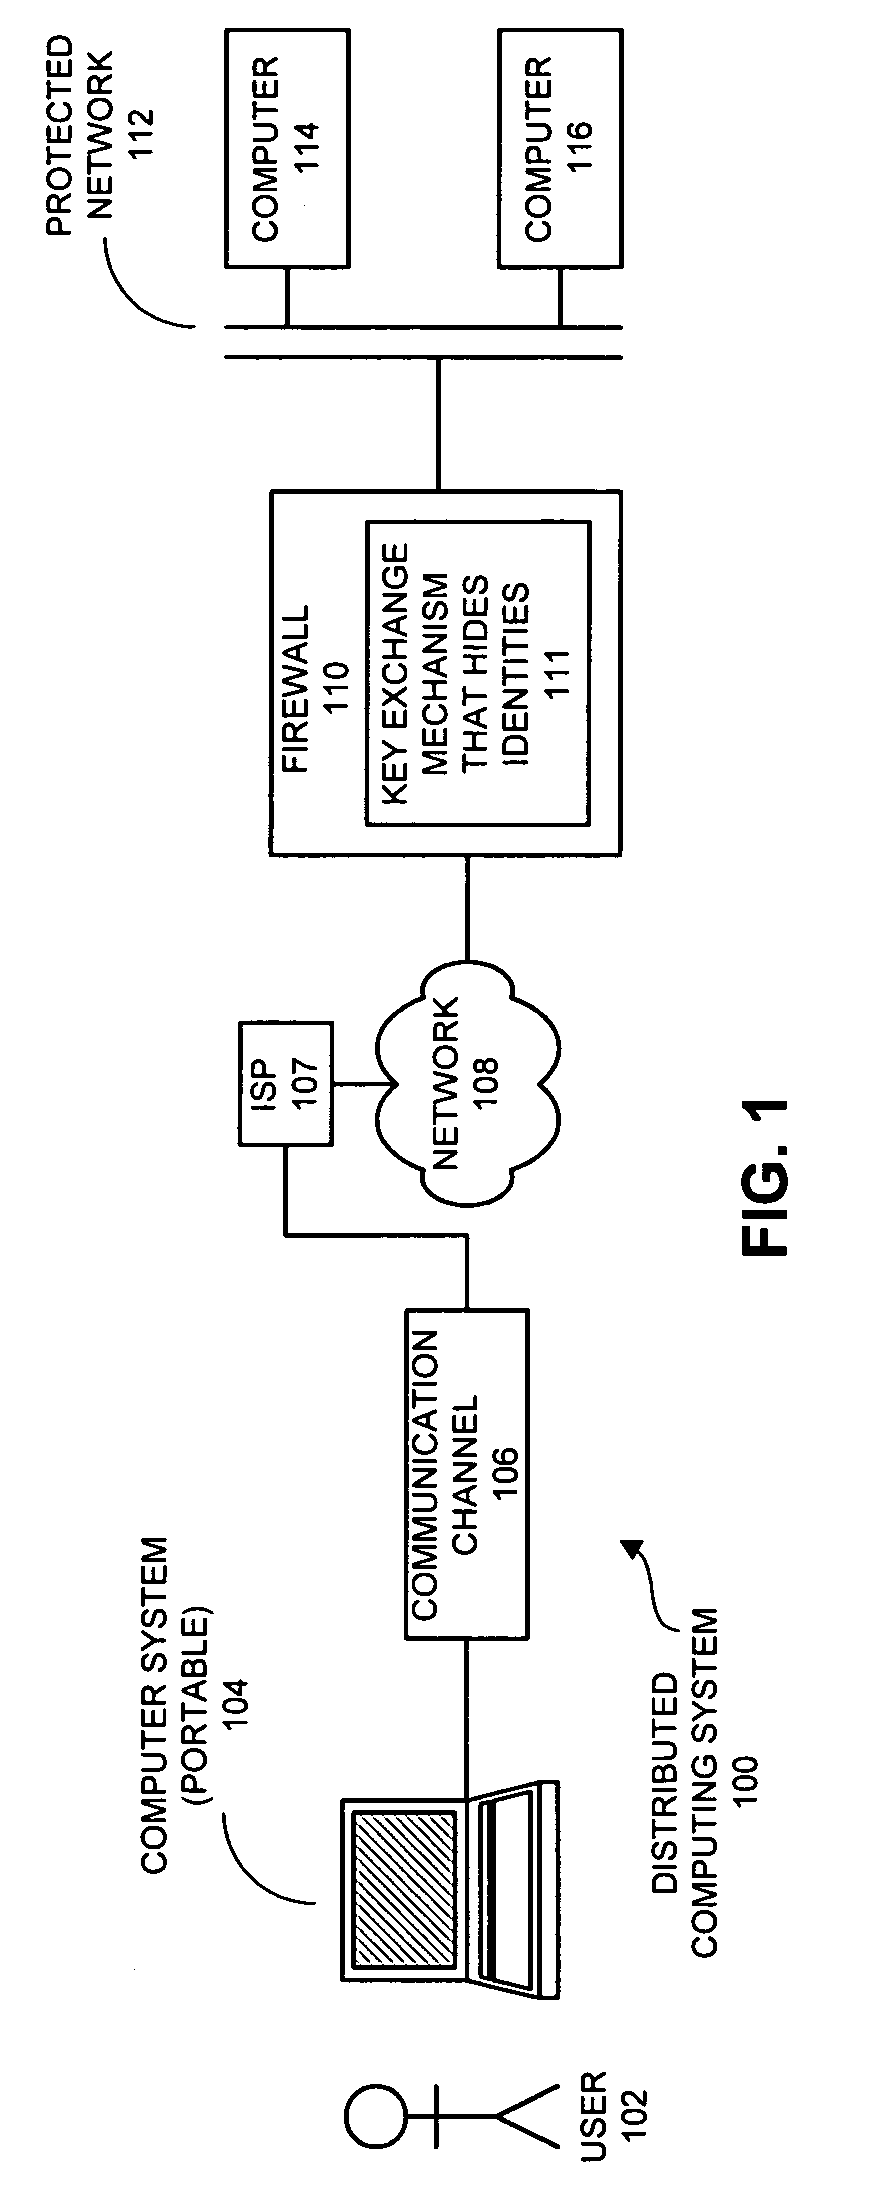 Method and apparatus for facilitating use of a pre-shared secret key with identity hiding